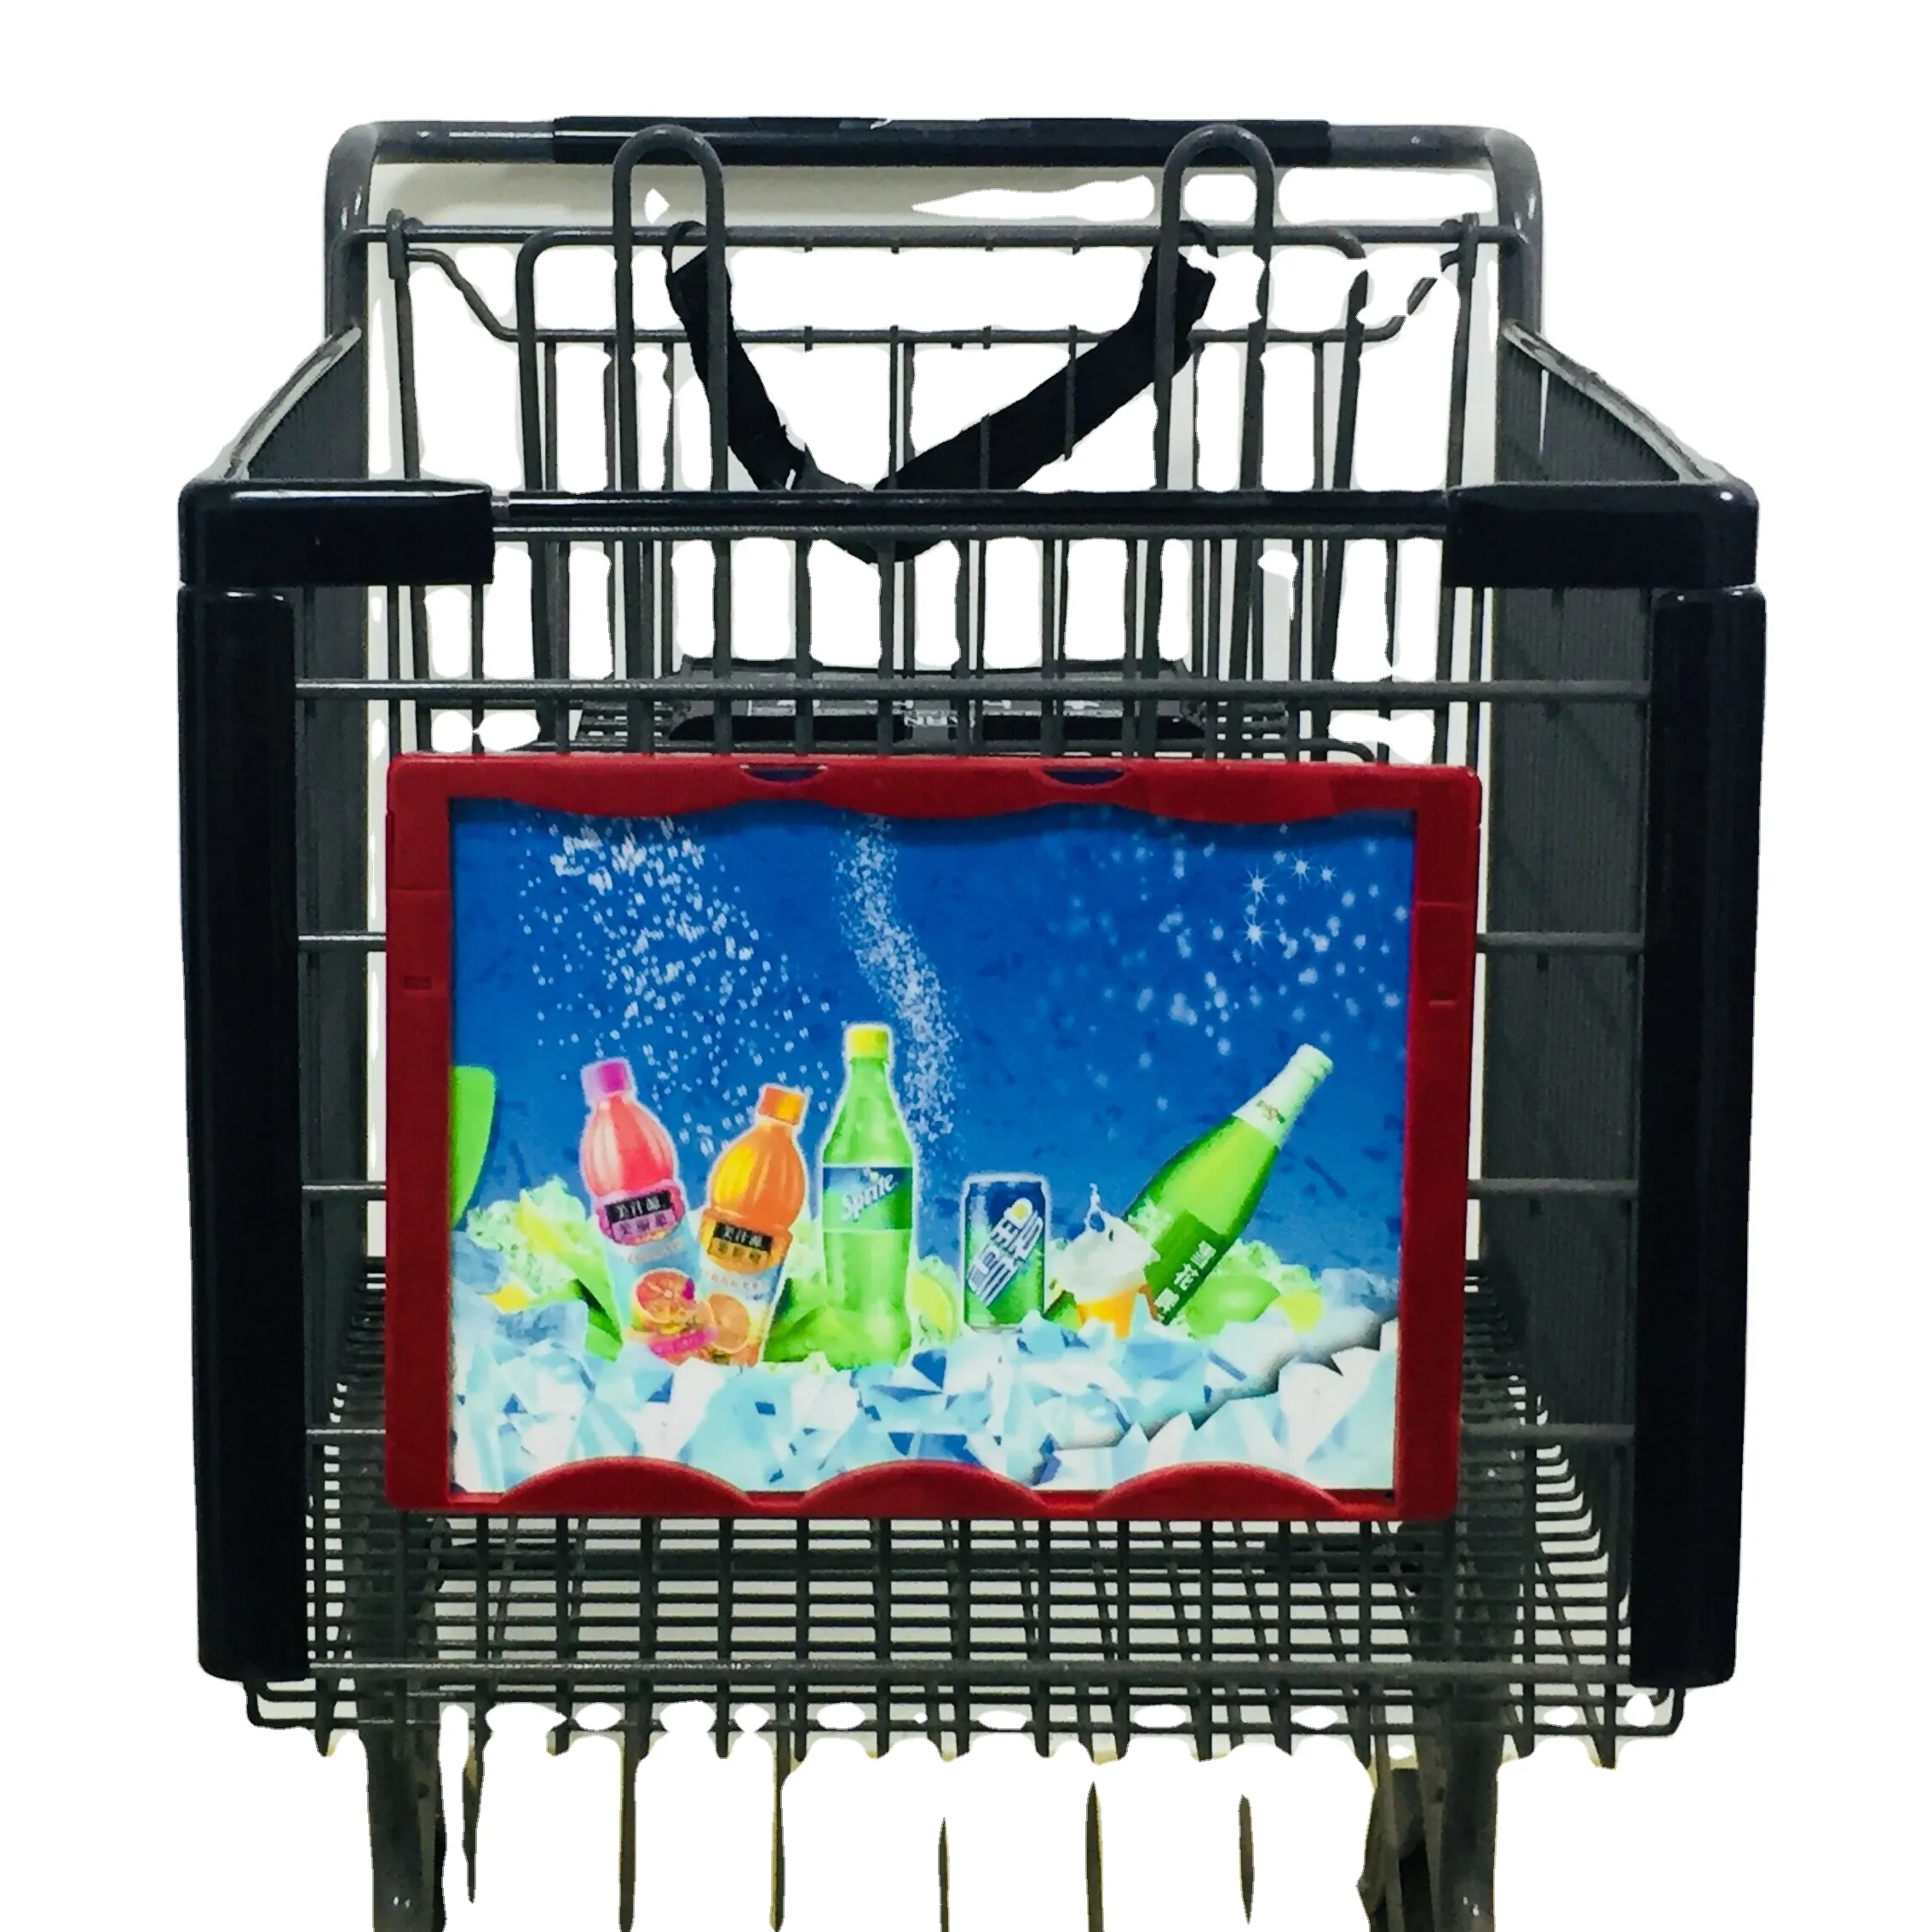 NEW Shopping Trolley A4 Size Advertising Display Board, Trolley Advertising Display With A4 Size Paper